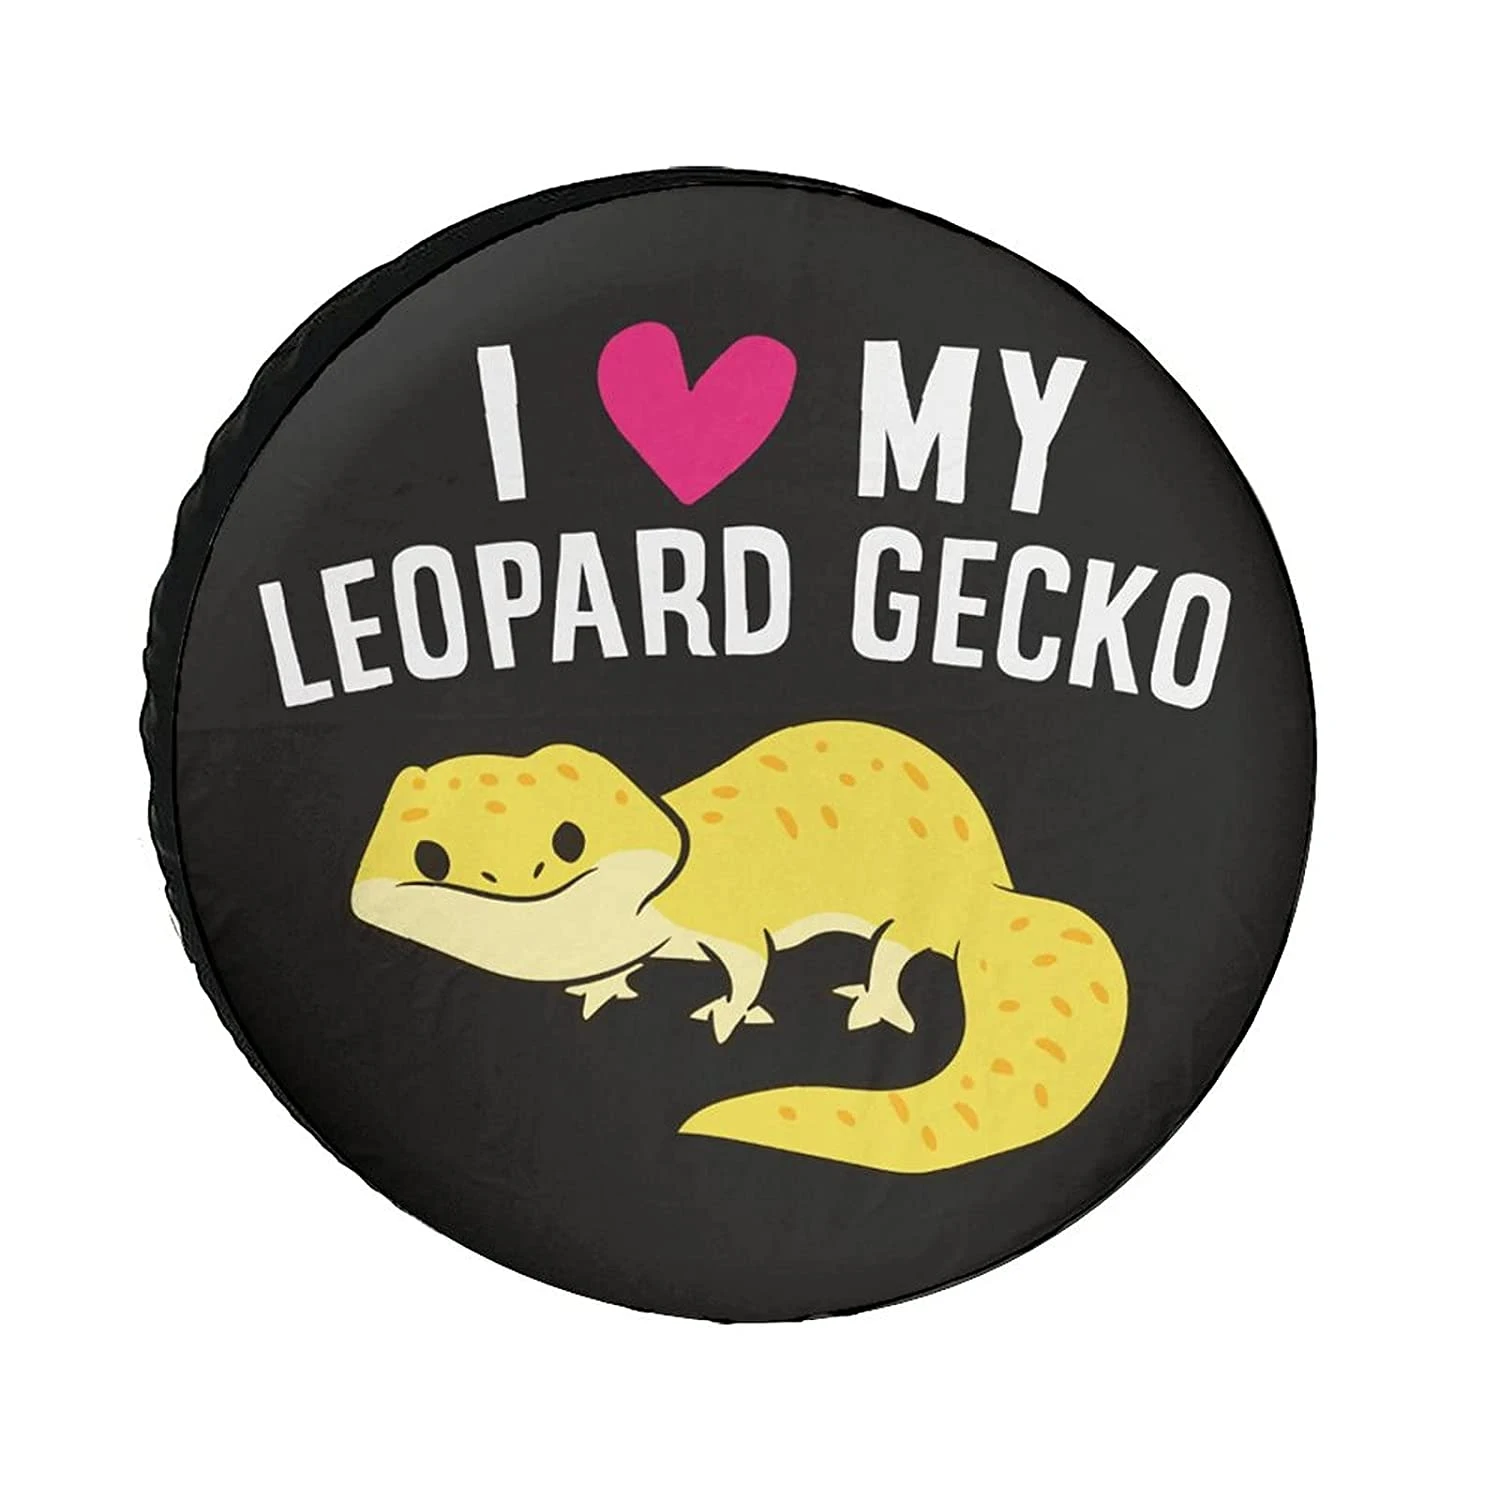 I Love My Leopard Gecko Universe Exploration Tire Covers Wheel Cover Protectors Weatherproof UV Protection Spare Tire sun cover for car